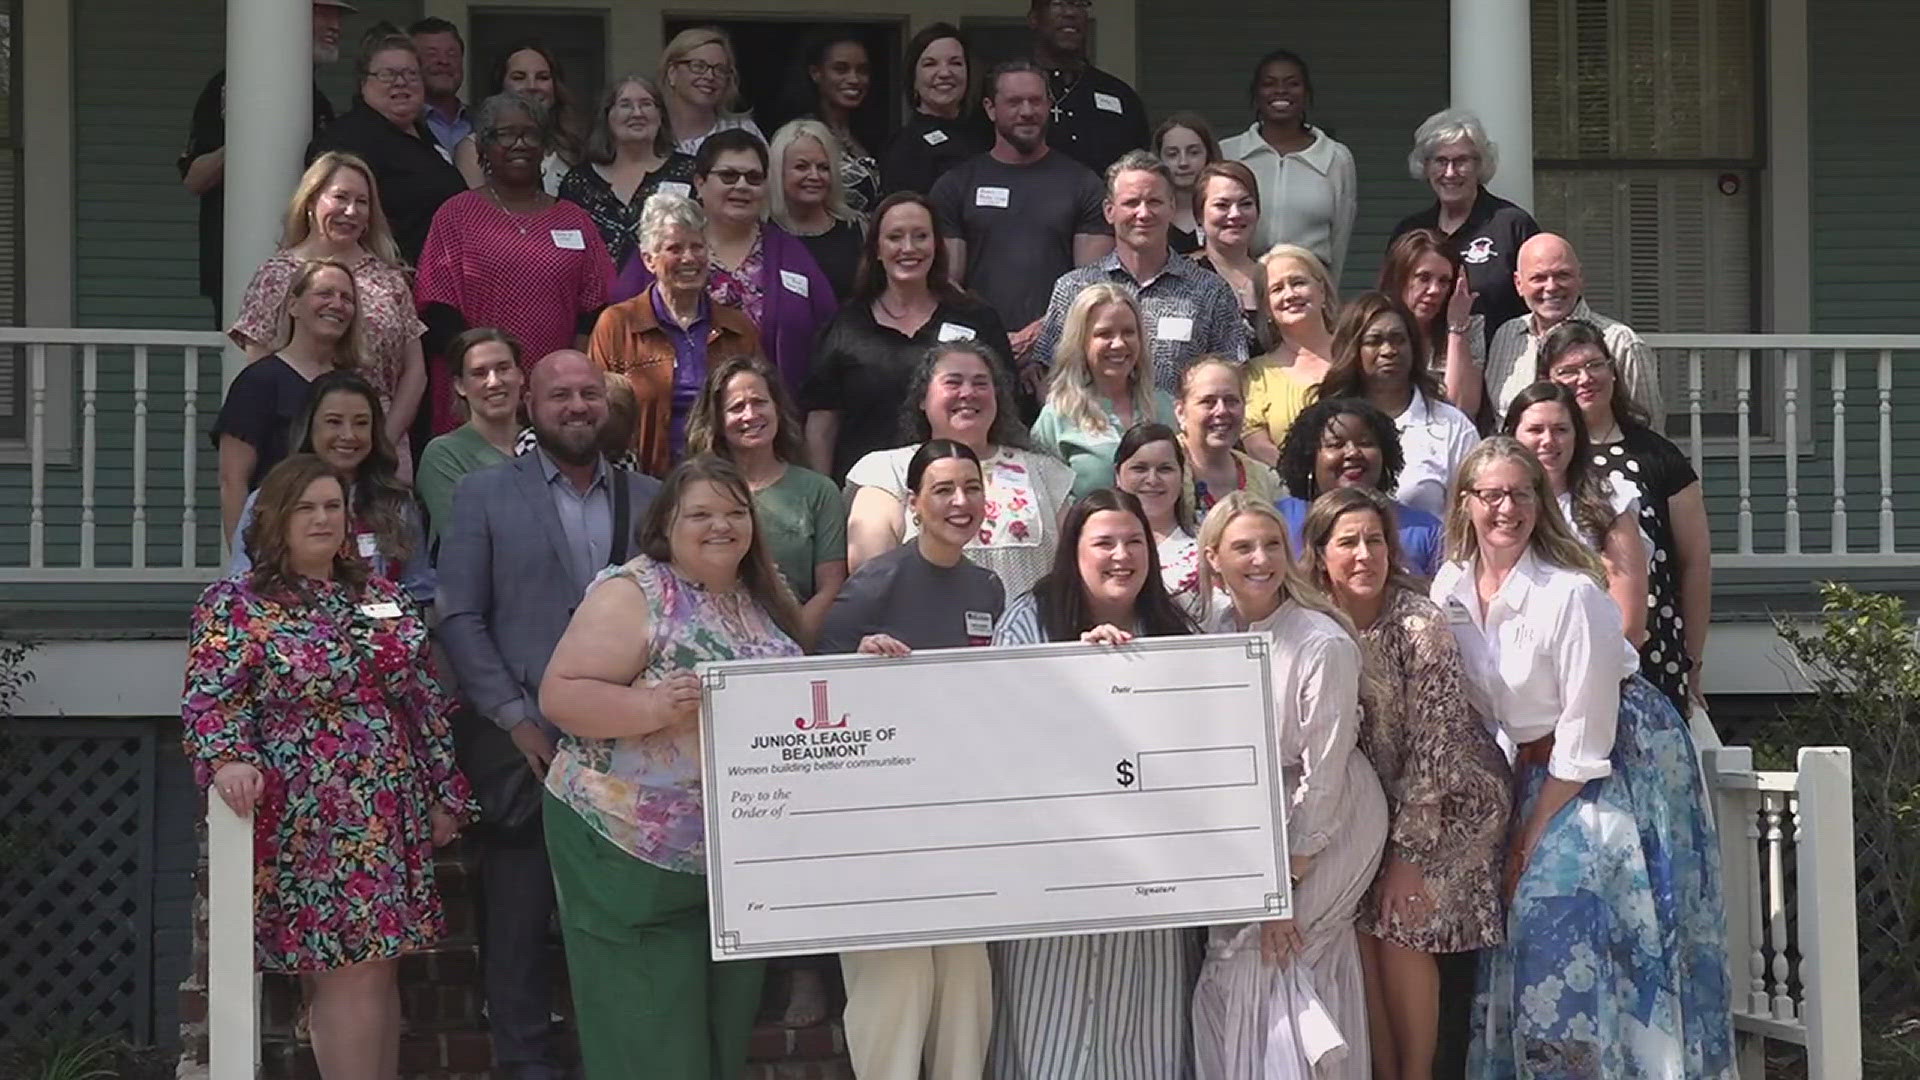 The organization gifted the Shorkey Center with a $50,000 donation.